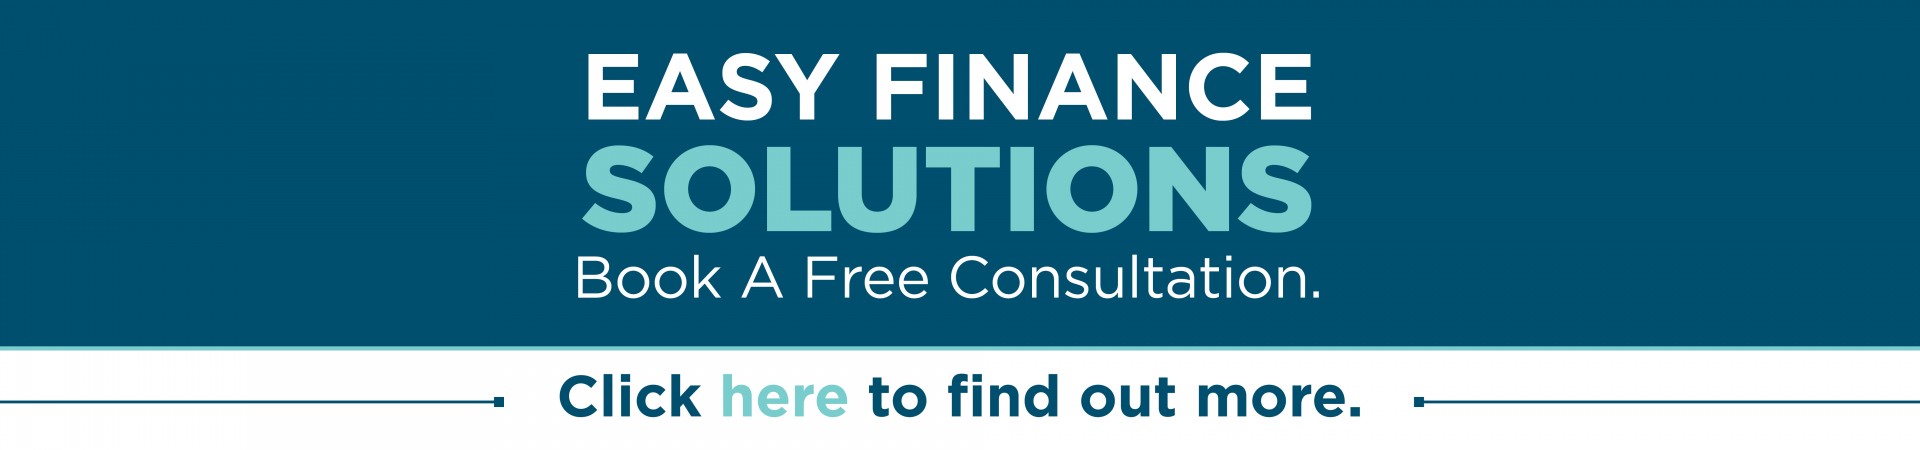 Easy Finance Solutions Abc finance Rossdale Homes Header Page Website banner template 1920 x 450